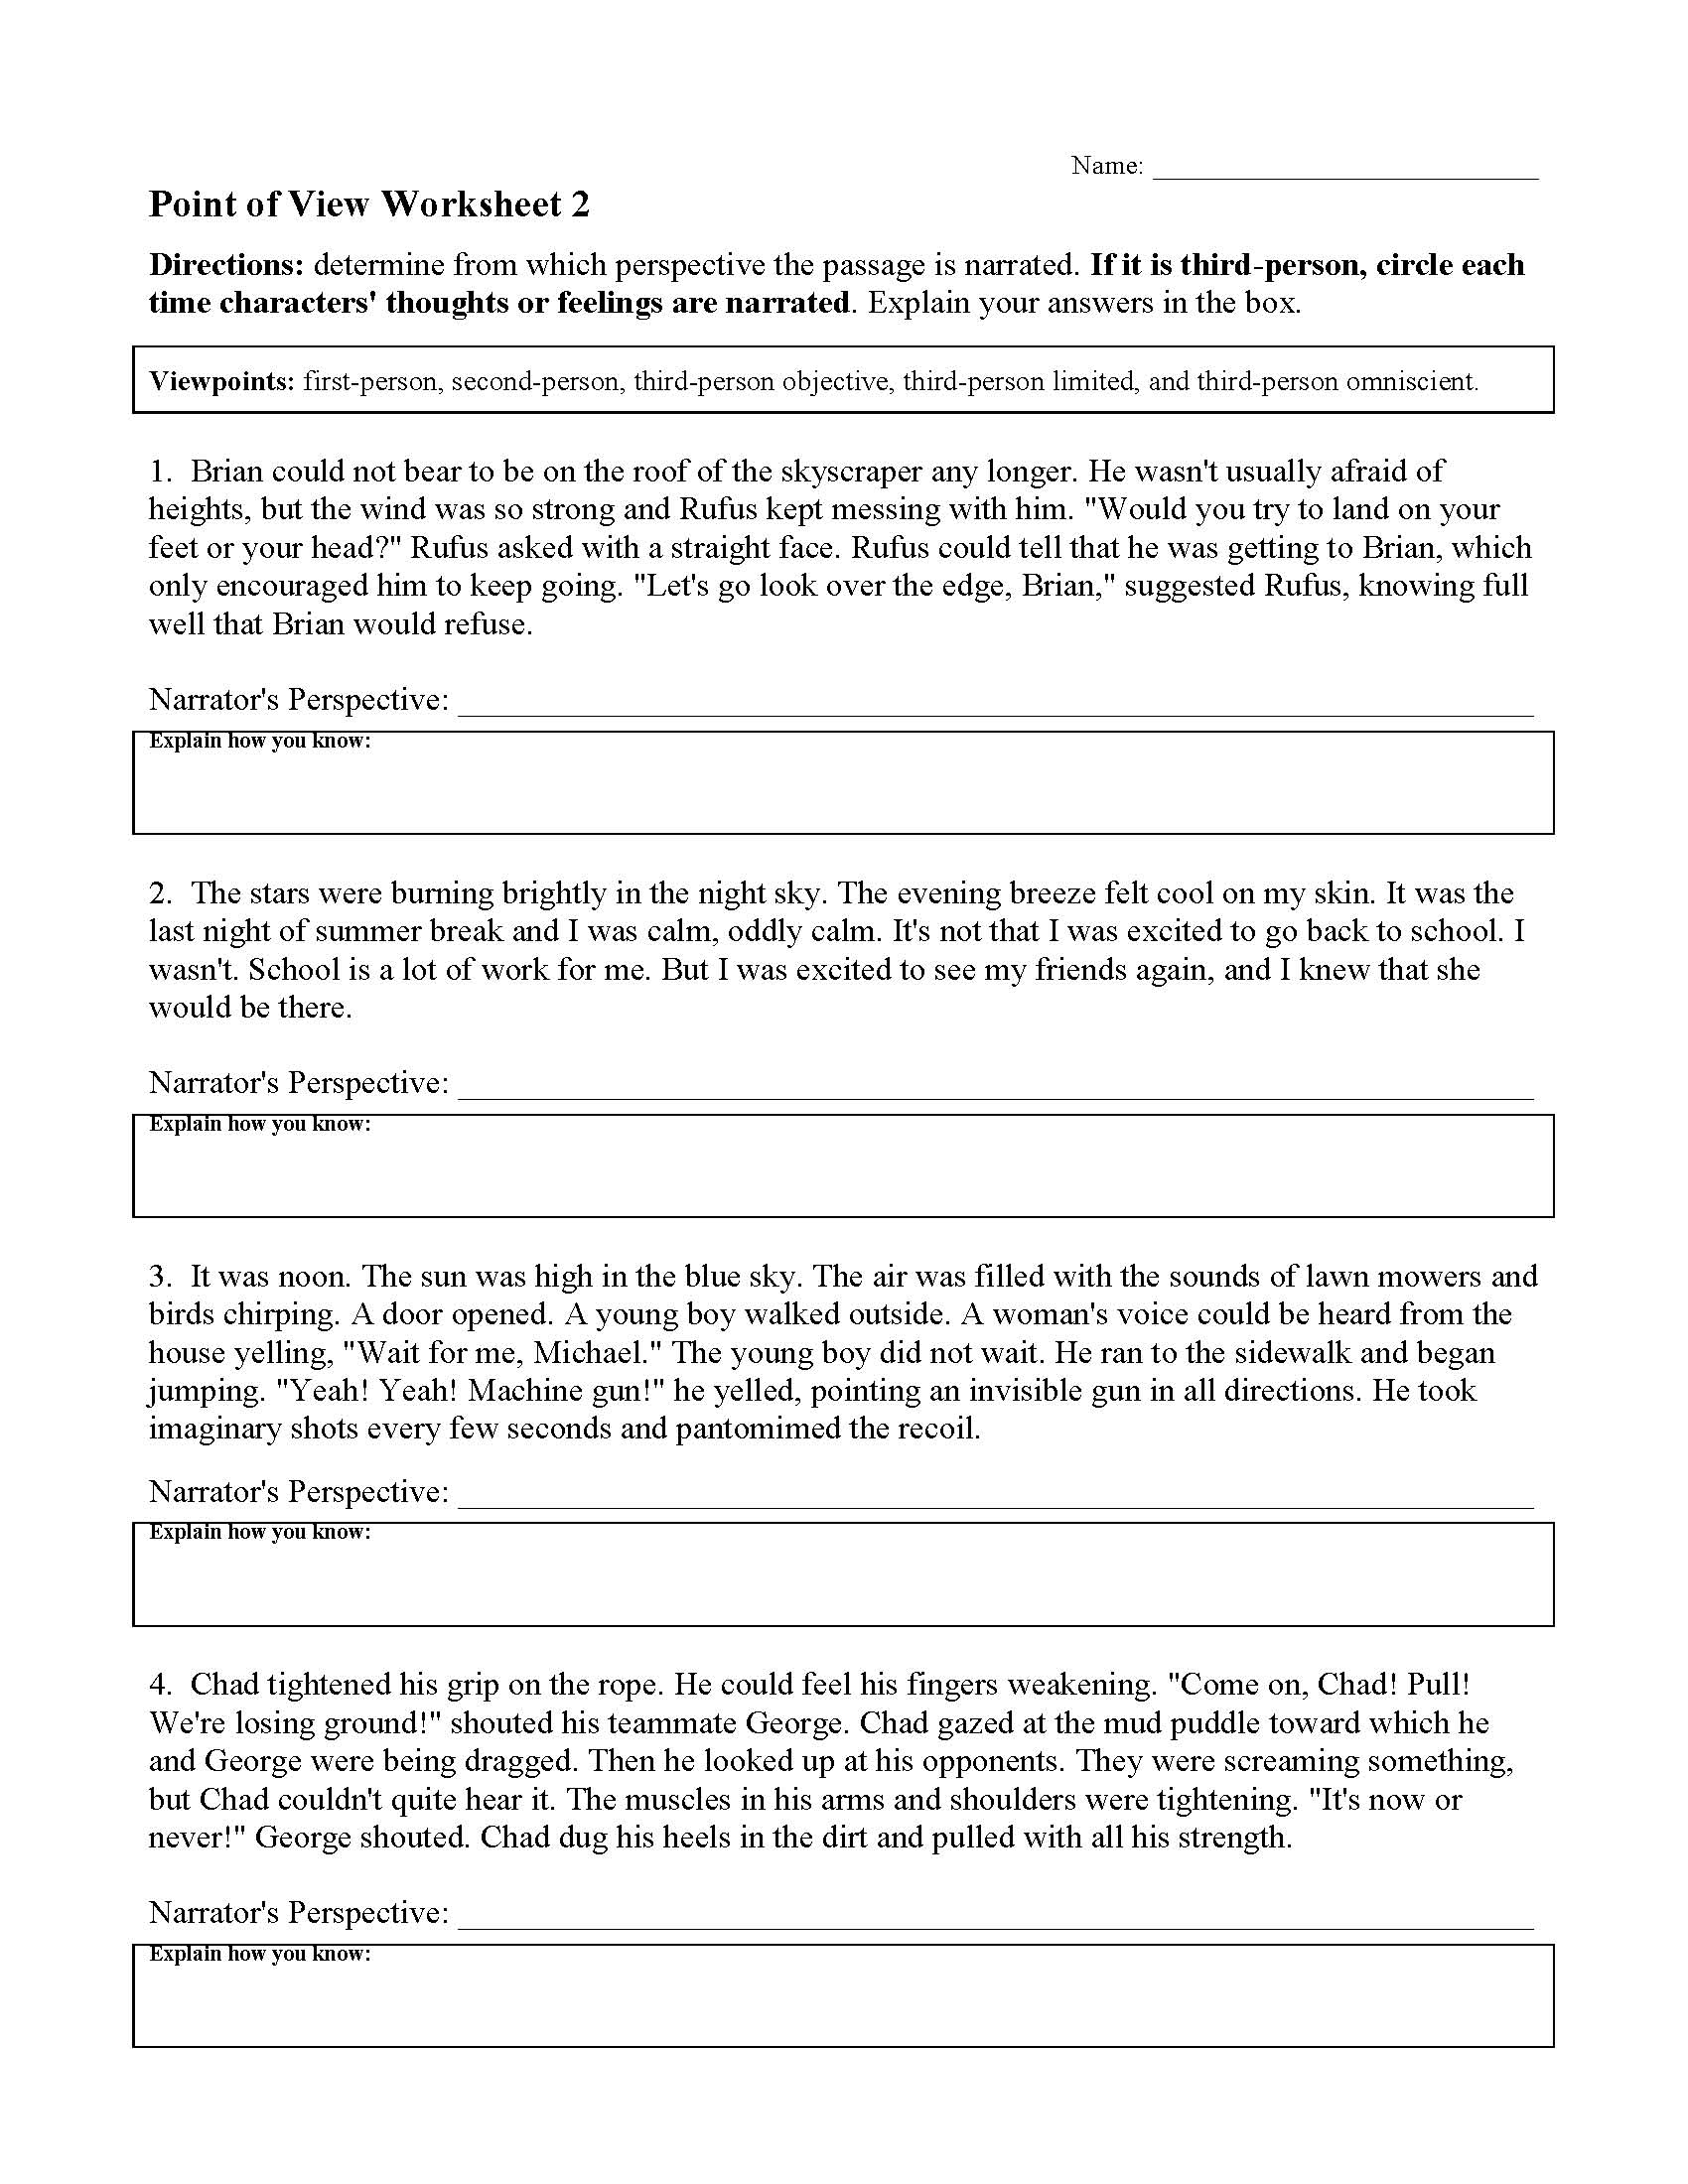 Point Of View Worksheet Answers Pdf Grade 4